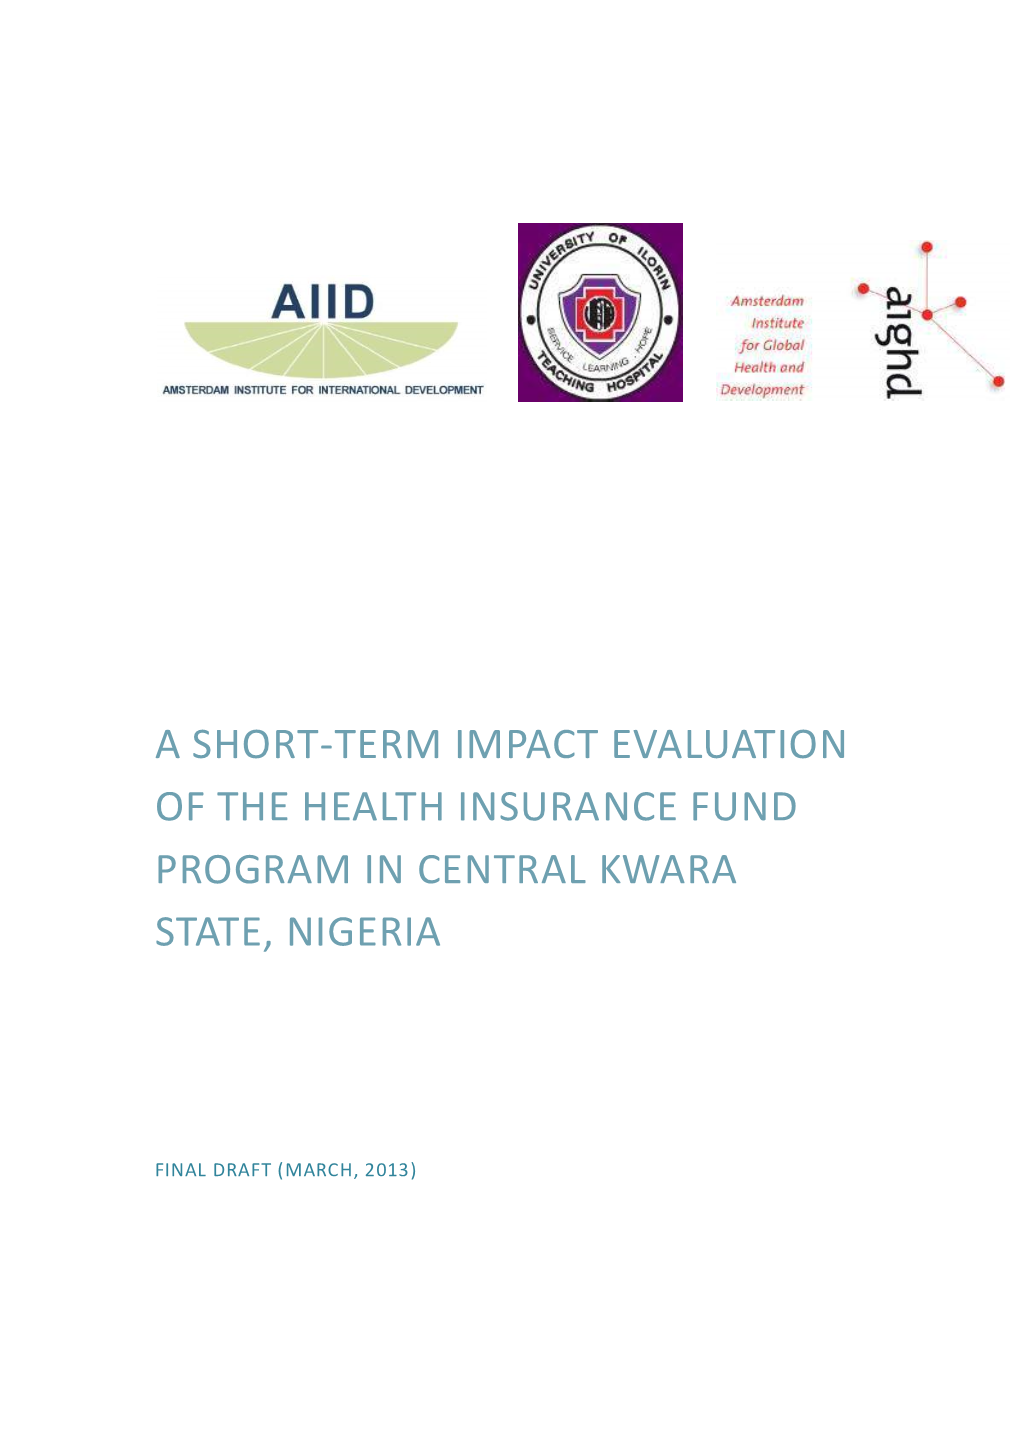 A Short-Term Impact Evaluation of the Health Insurance Fund Program in Central Kwara State, Nigeria